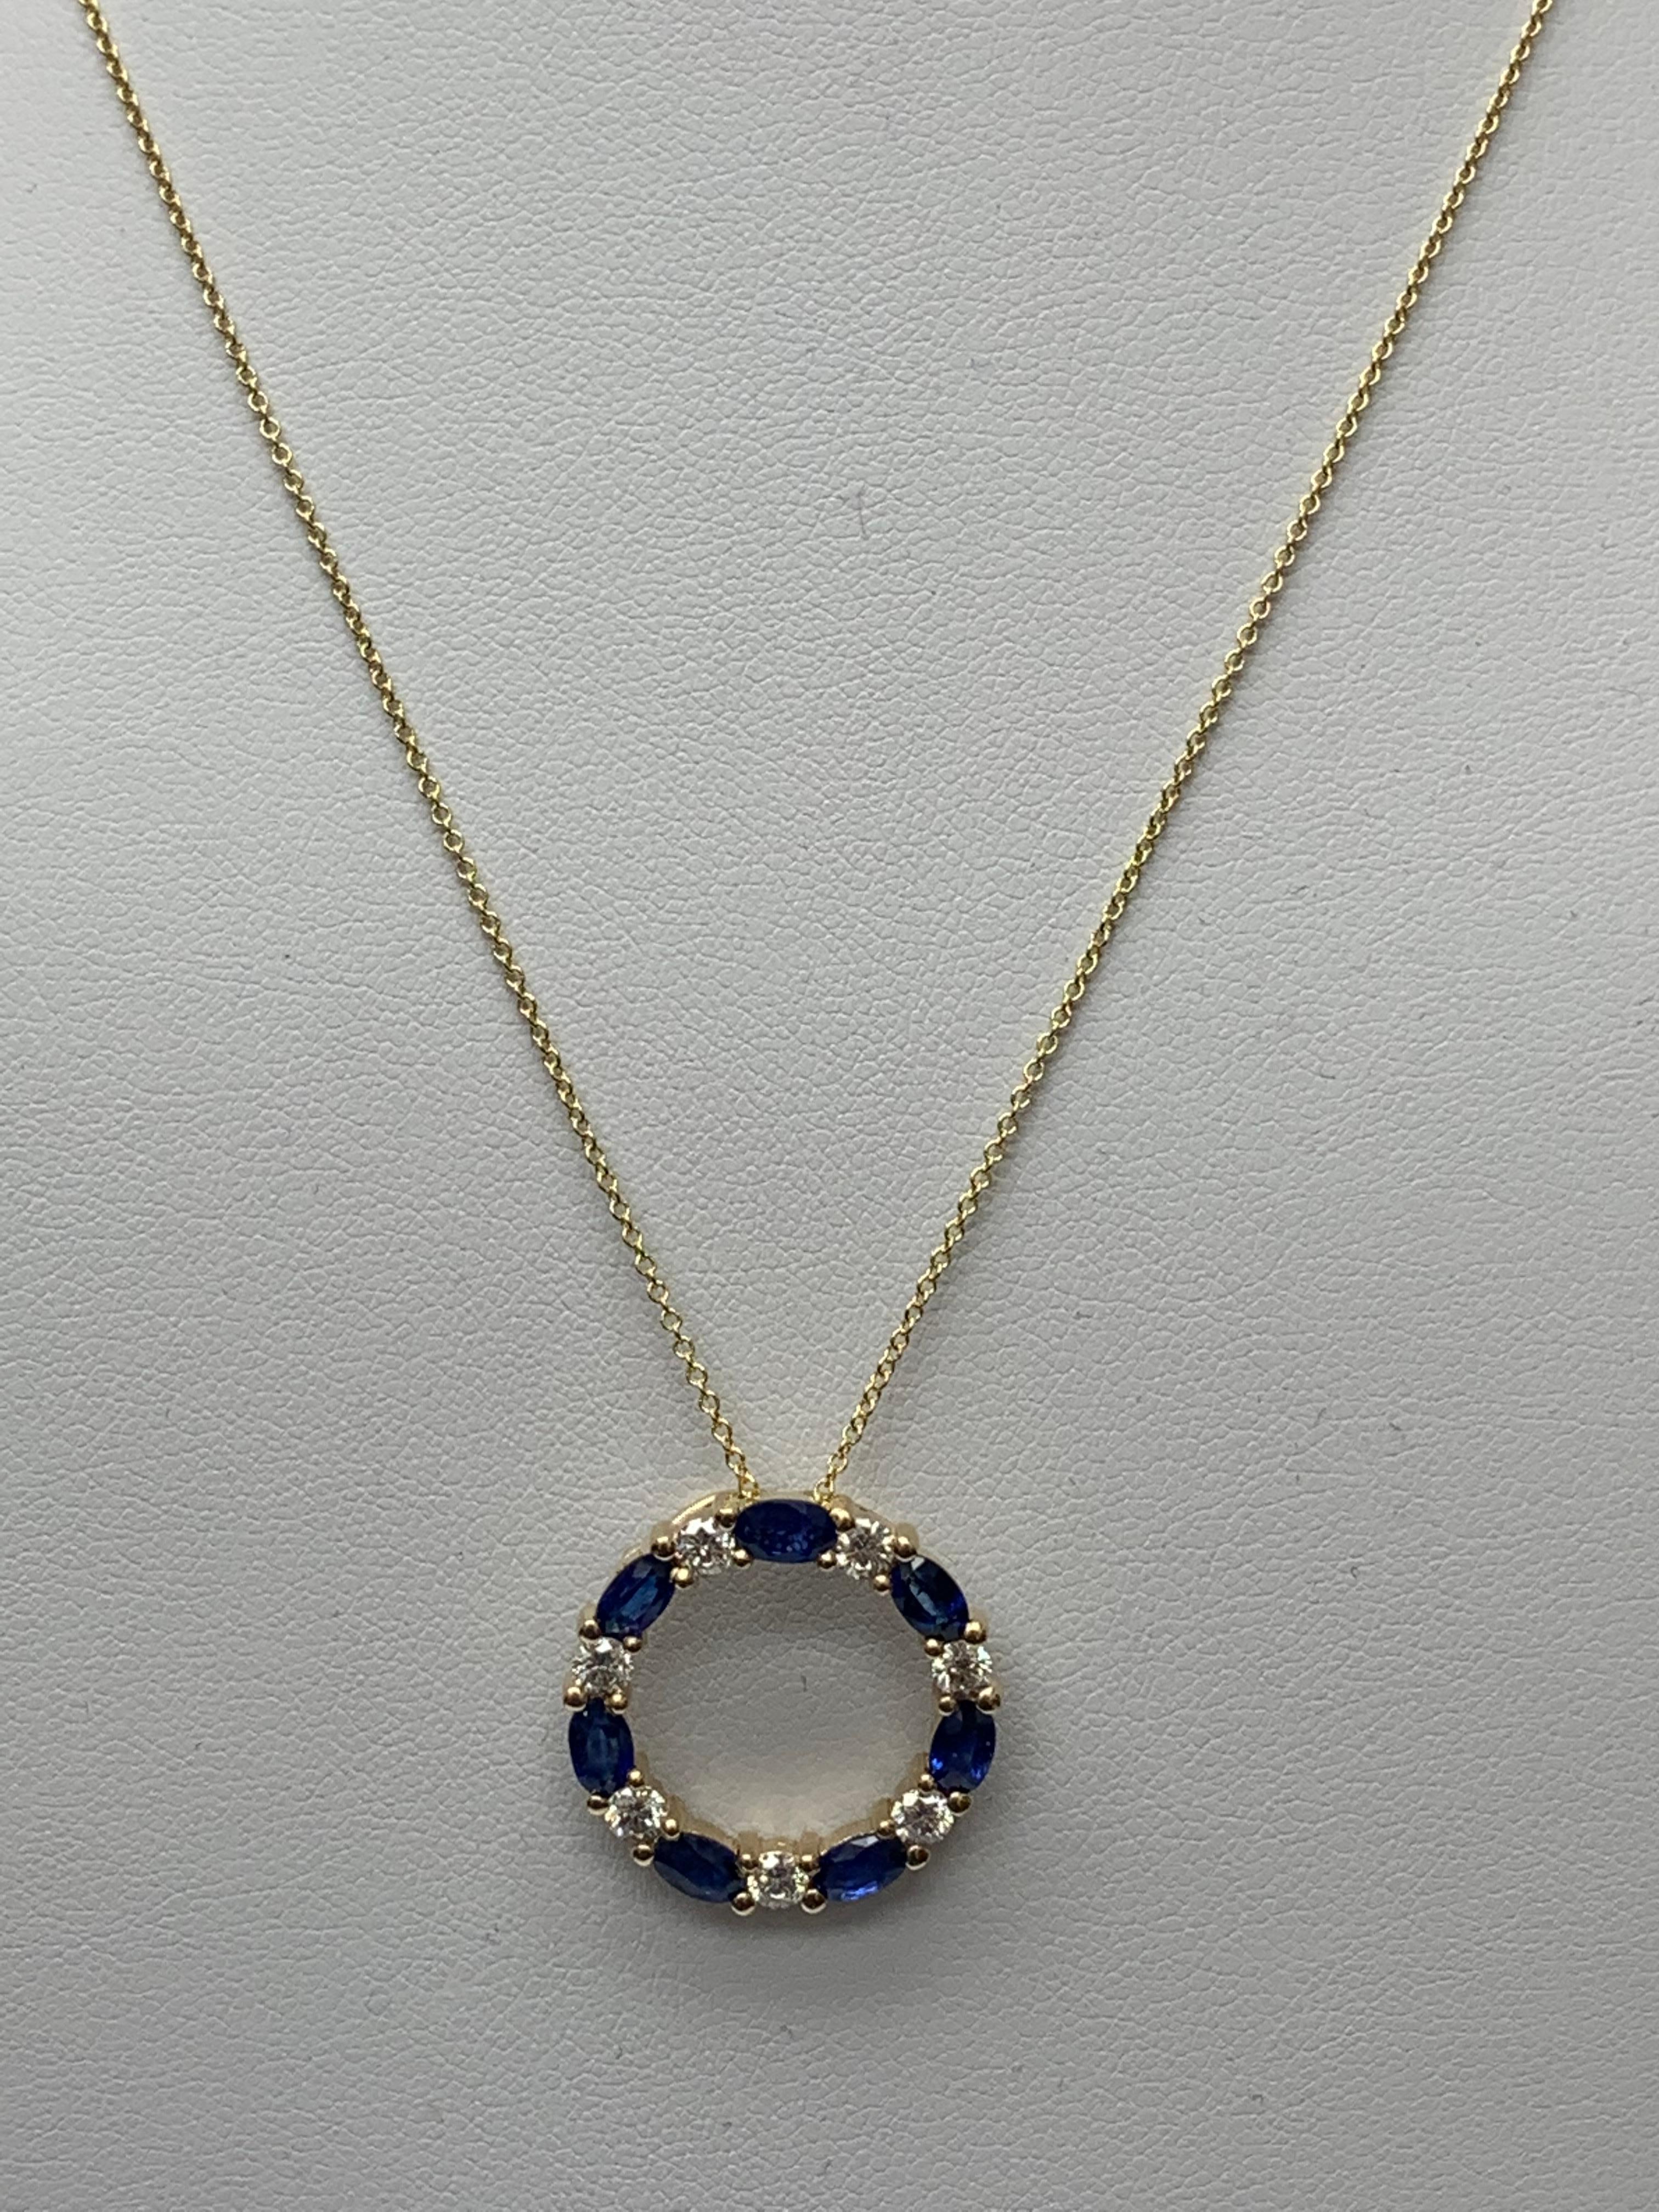 Modern 2.05 Carat Blue Sapphire and Diamond Circle Pendant Necklace in 14k Yellow Gold For Sale